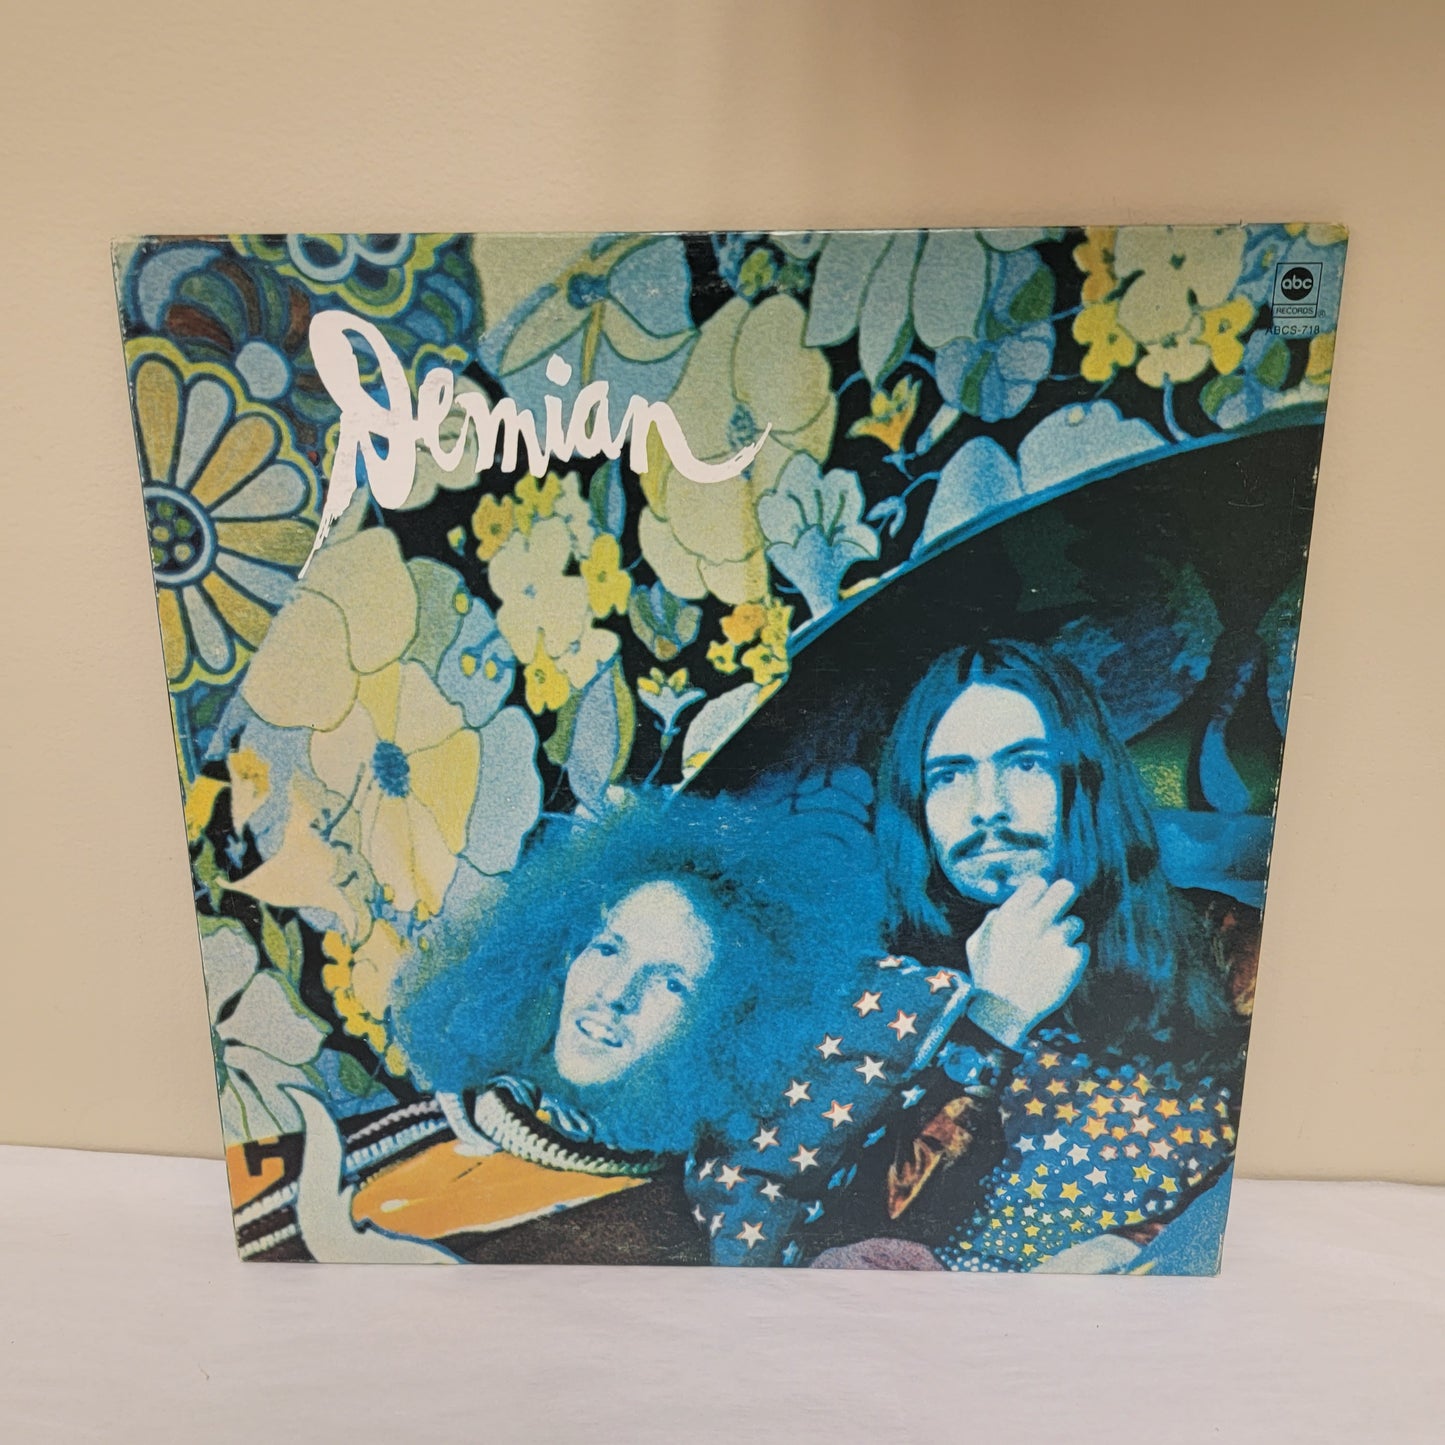 Demian (Bubble Puppy) 1971 Psychedelic Rock Record Album